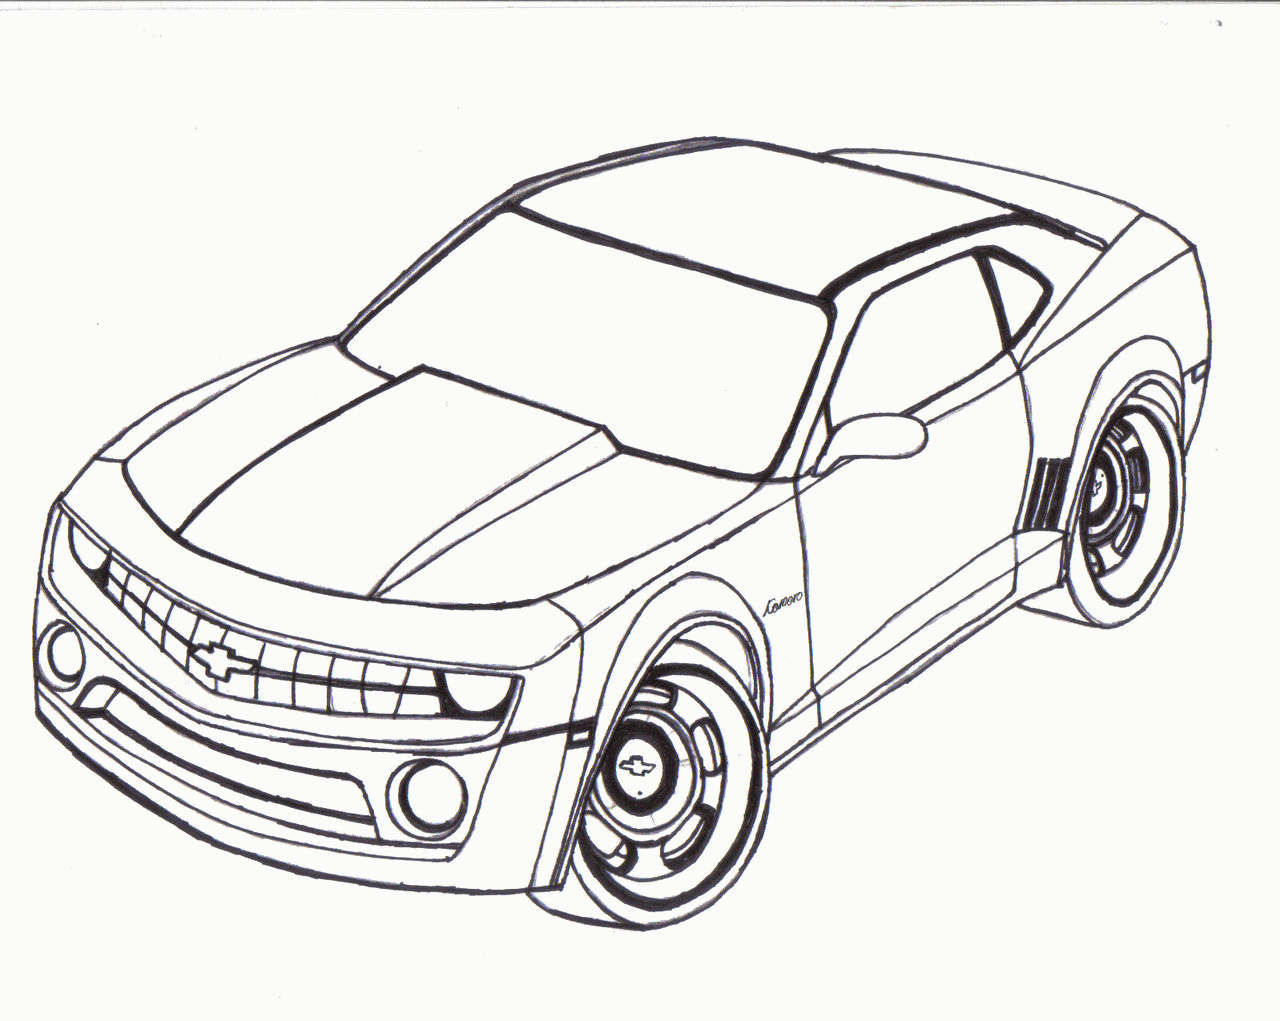 Chevrolet Camaro Cars Coloring Pages| Coloring Pages for Kids #Kb